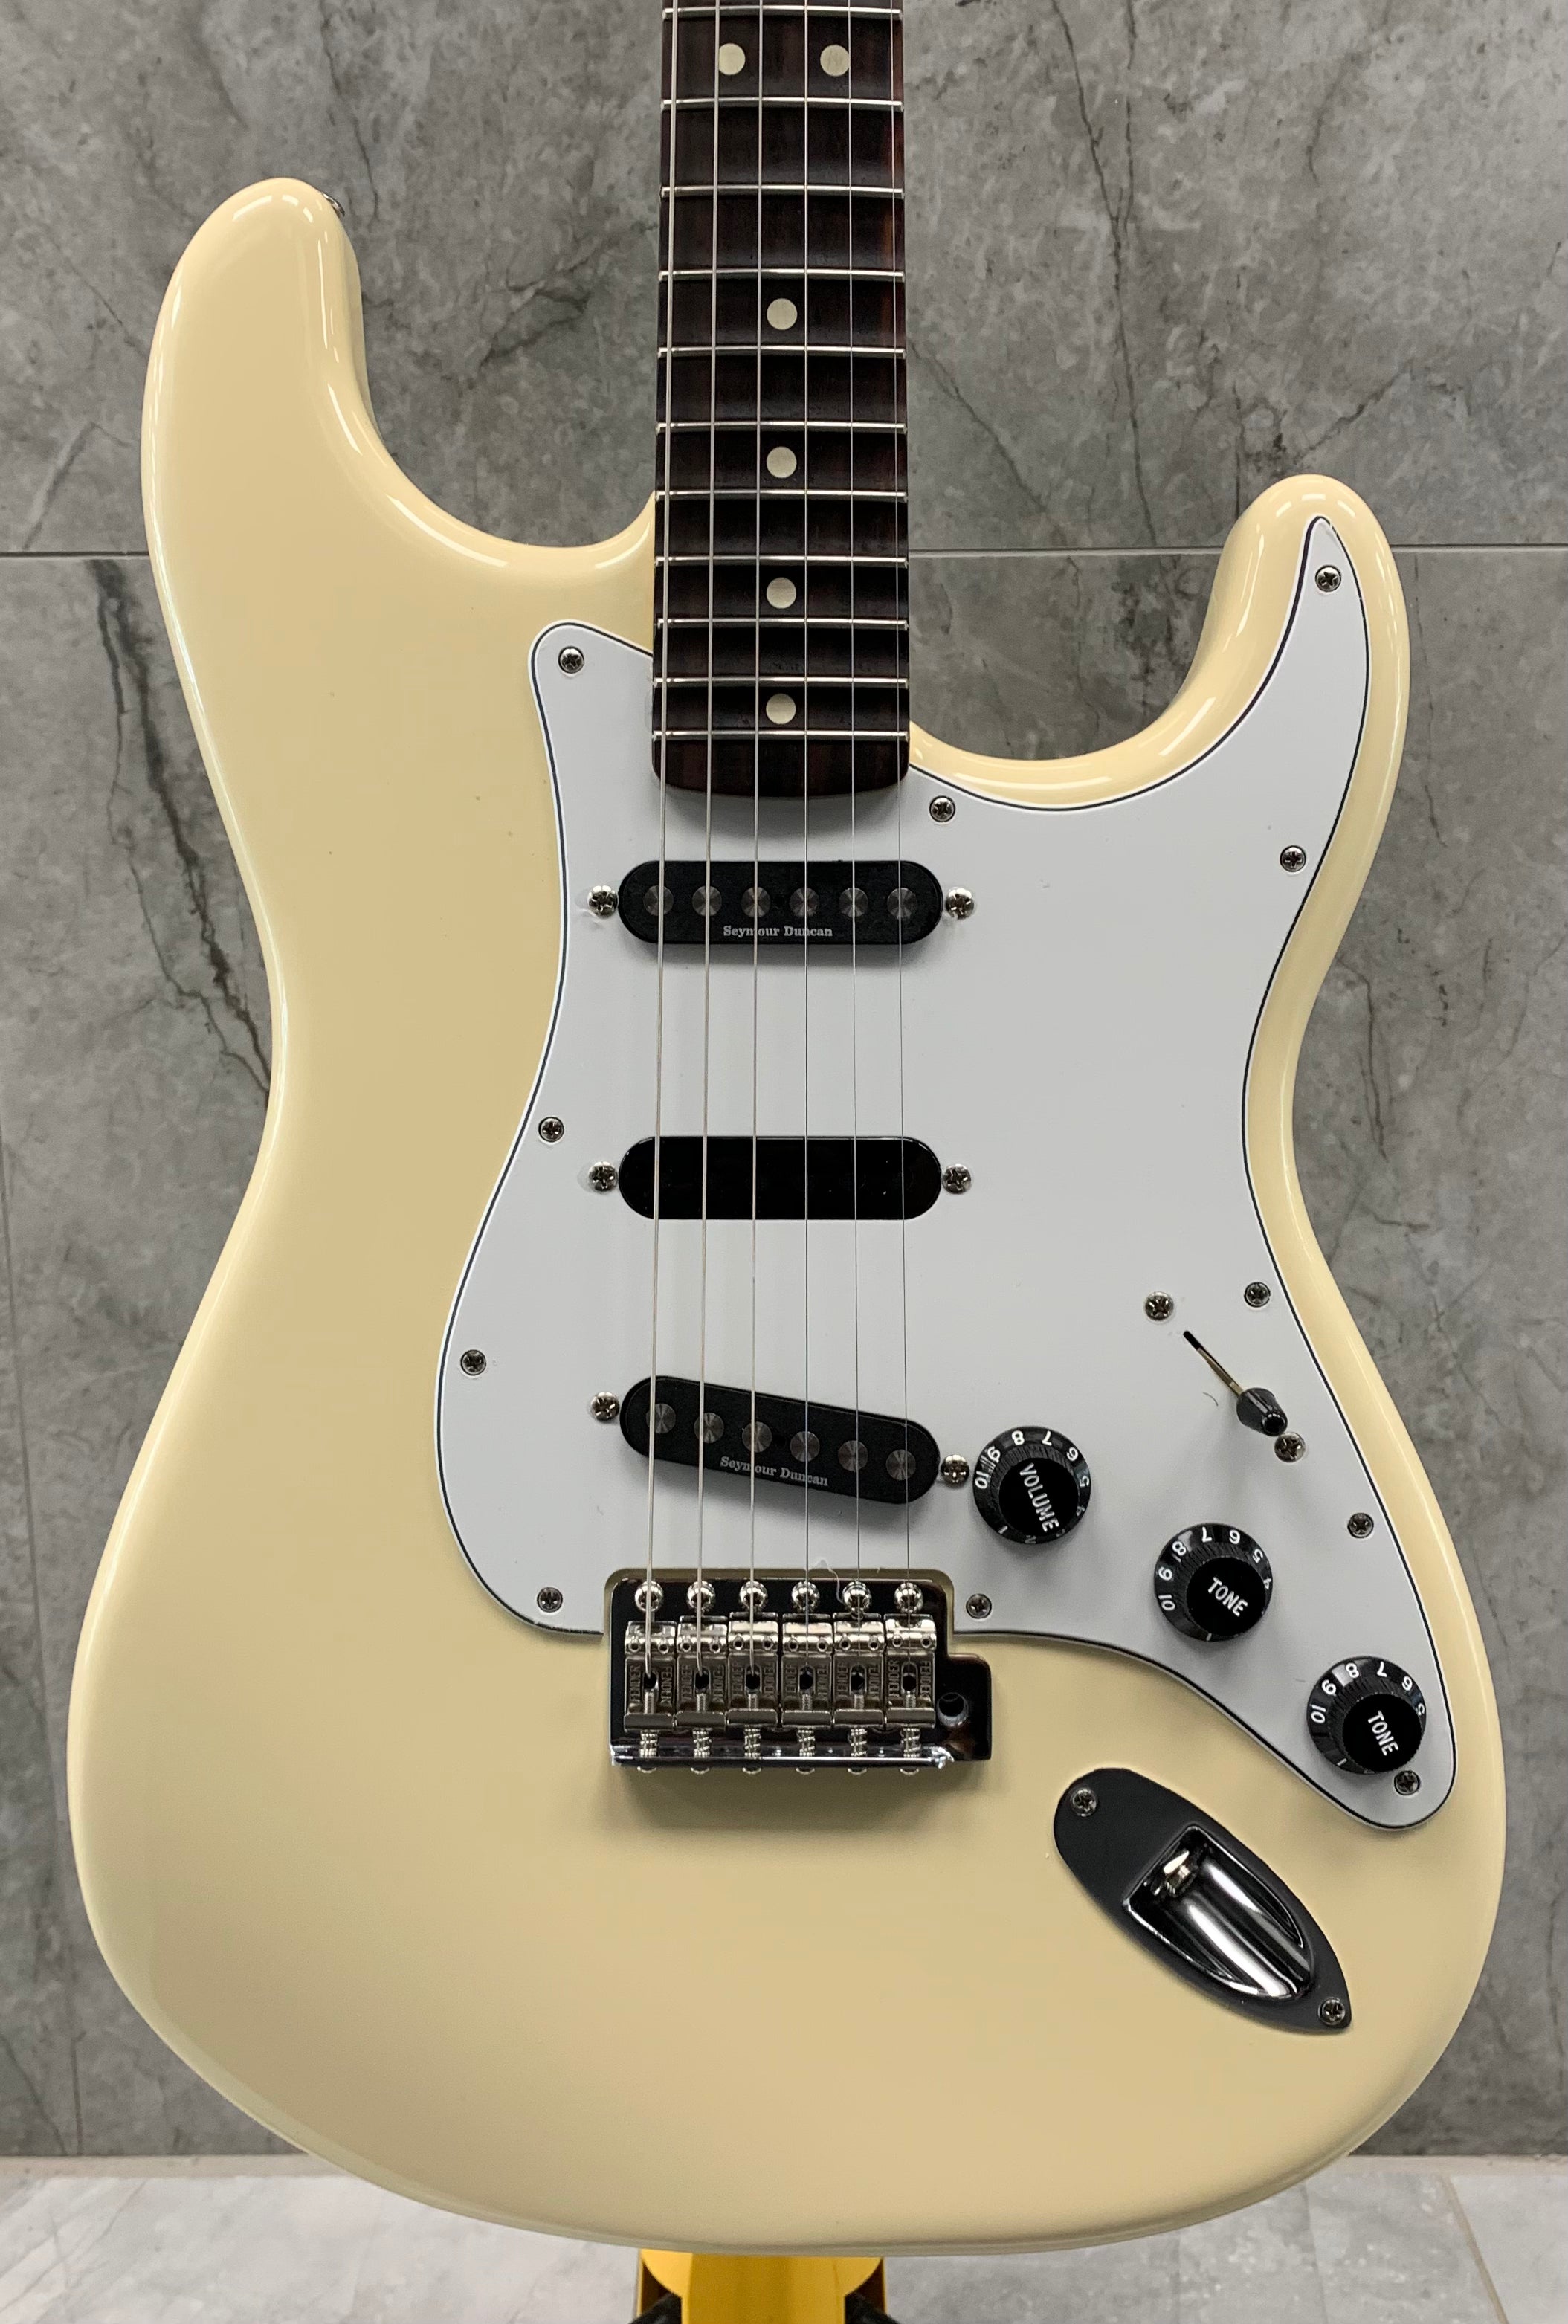 Fender Ritchie Blackmore Stratocaster Scalloped Rosewood Fingerboard Olympic White F-0139010305